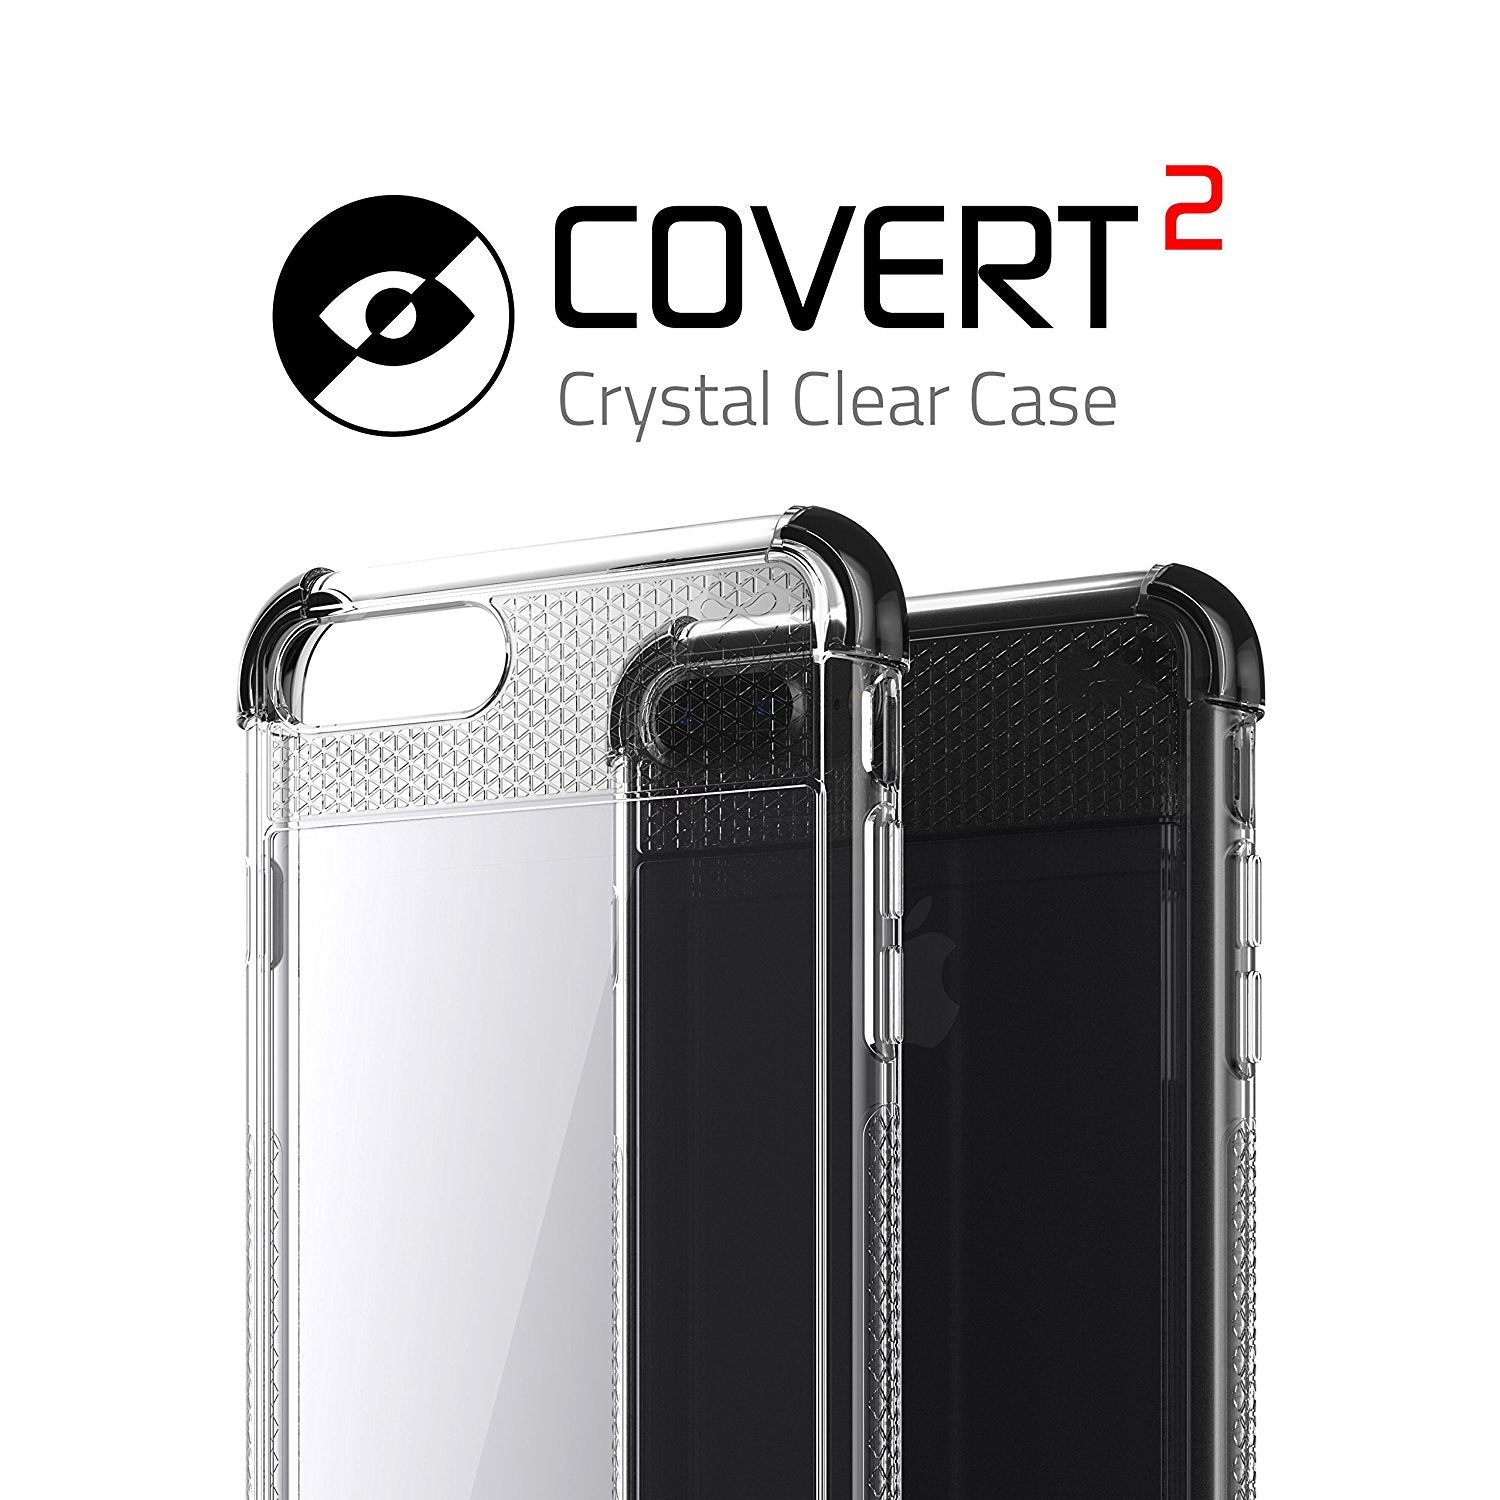 iPhone 7+ Plus Case, Ghostek Covert 2 Series for iPhone 7+ Plus Protective Case [ Black]